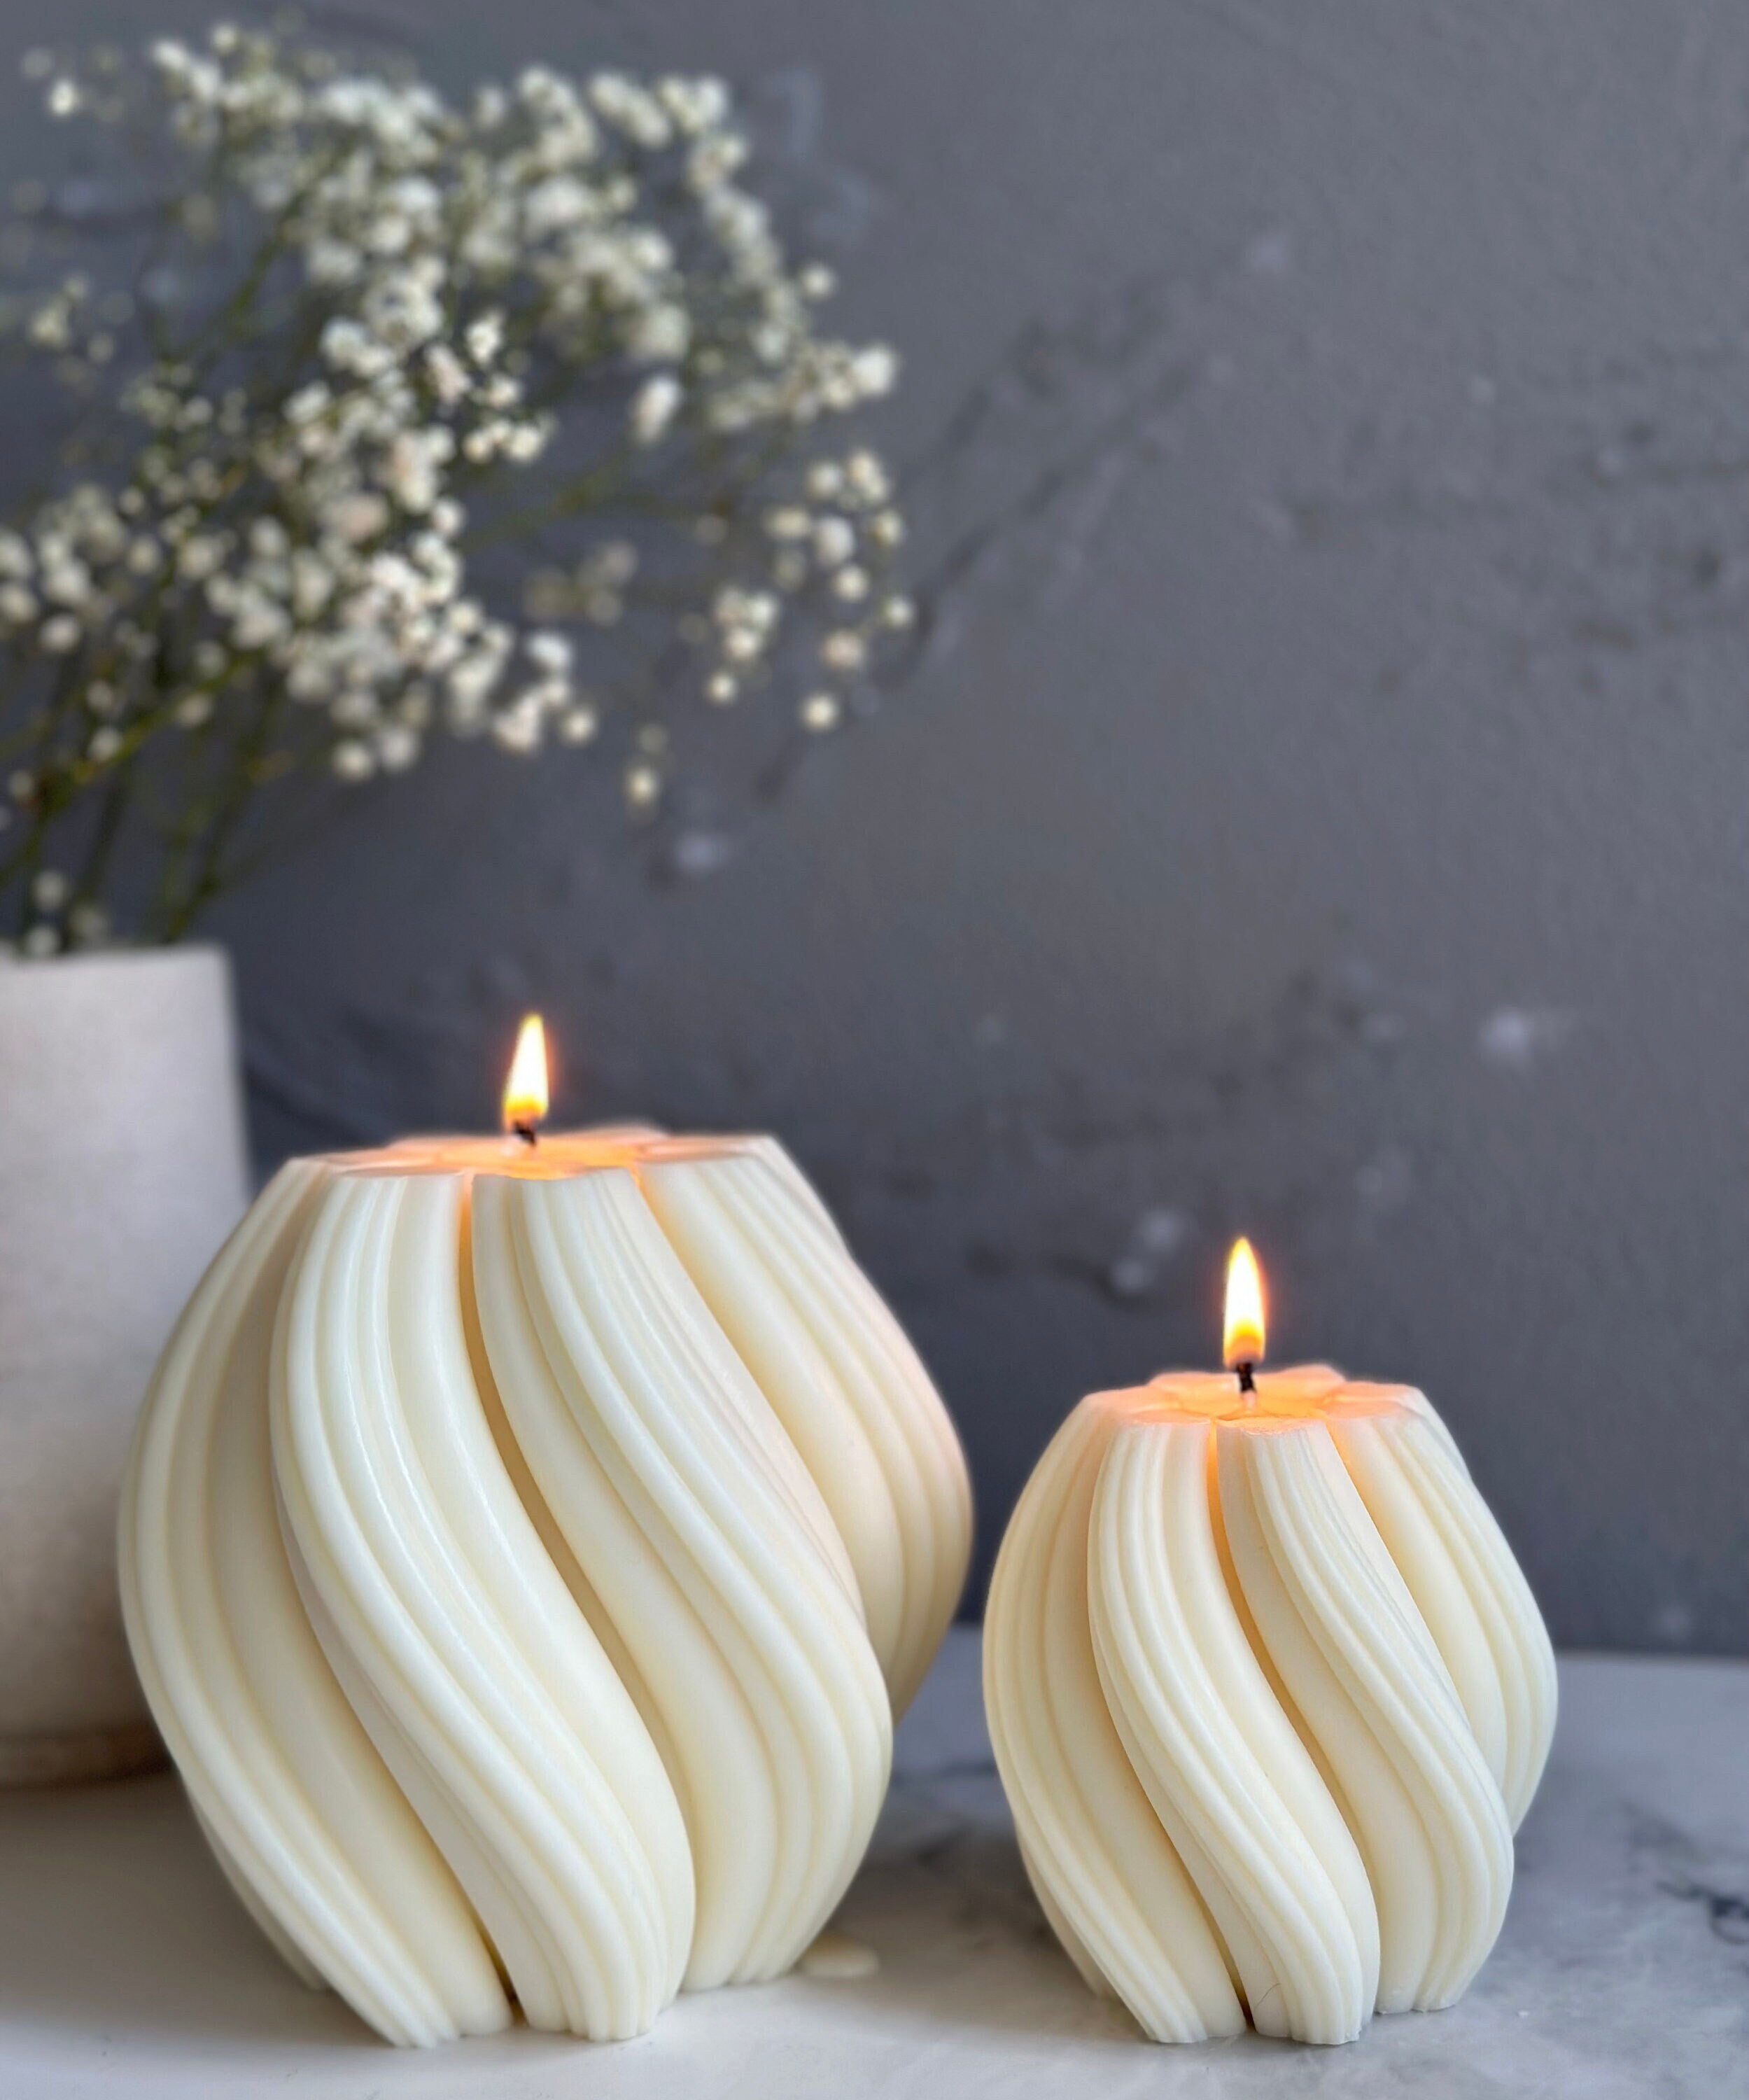 Unique Swirl Candle Mould Silicone,wavy Spiral Twisted Striped Soy Wax Mold  for Making Aesthetic Sculpture Scented Bougie Decor Wedding Gift 